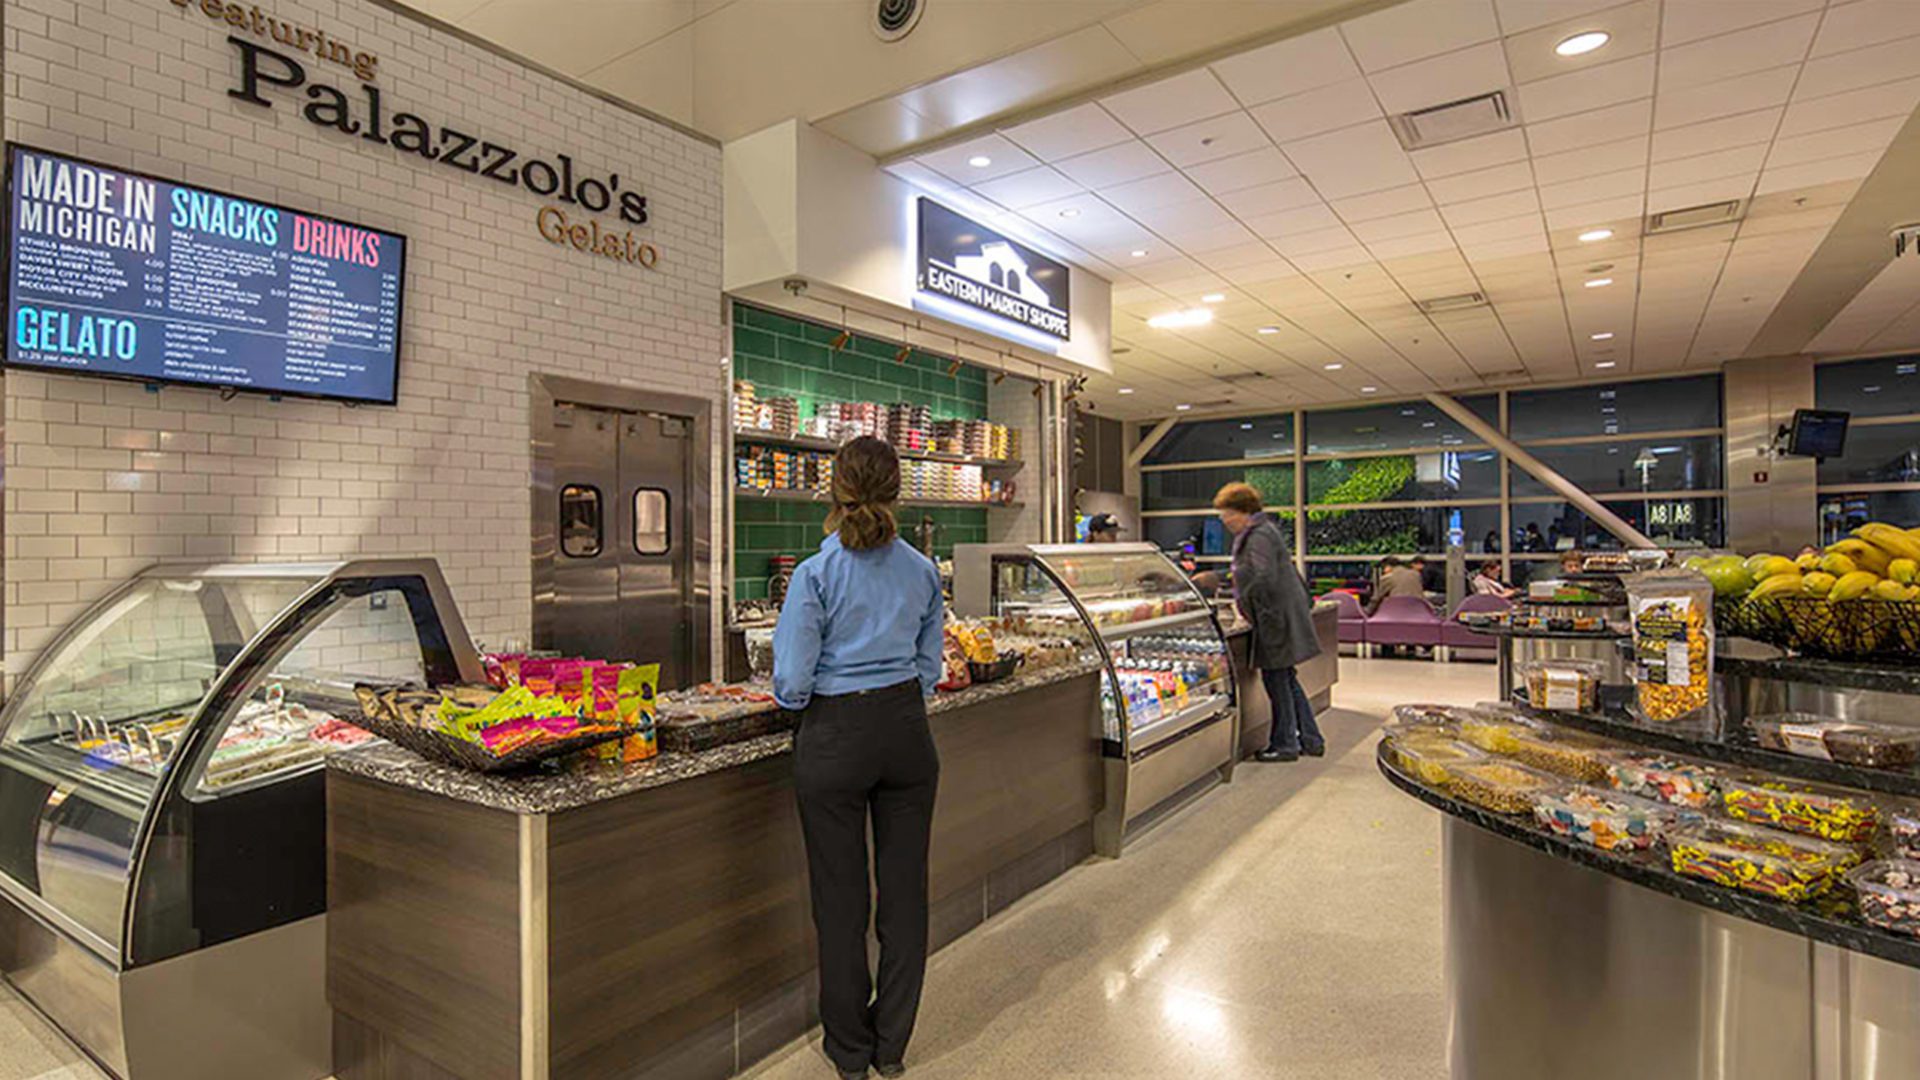 cafeteria view at Eastern Market @ DTW. sign reads "palazzolo's gelato"